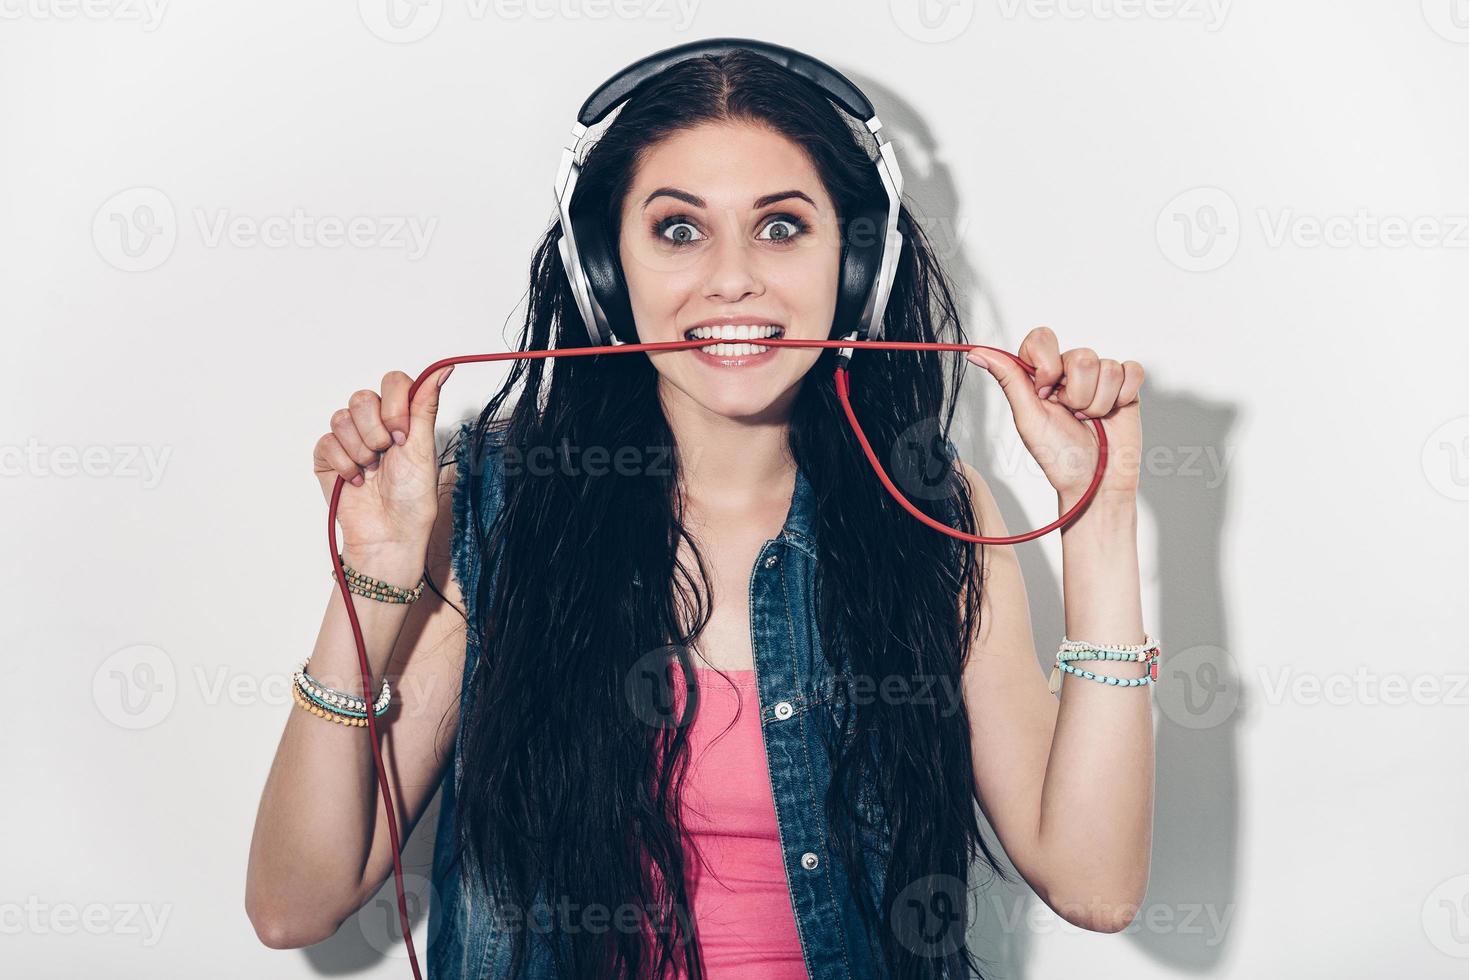 Music lover. Beautiful young woman in headphones carrying wire in mouth and looking excited while standing against grey background photo